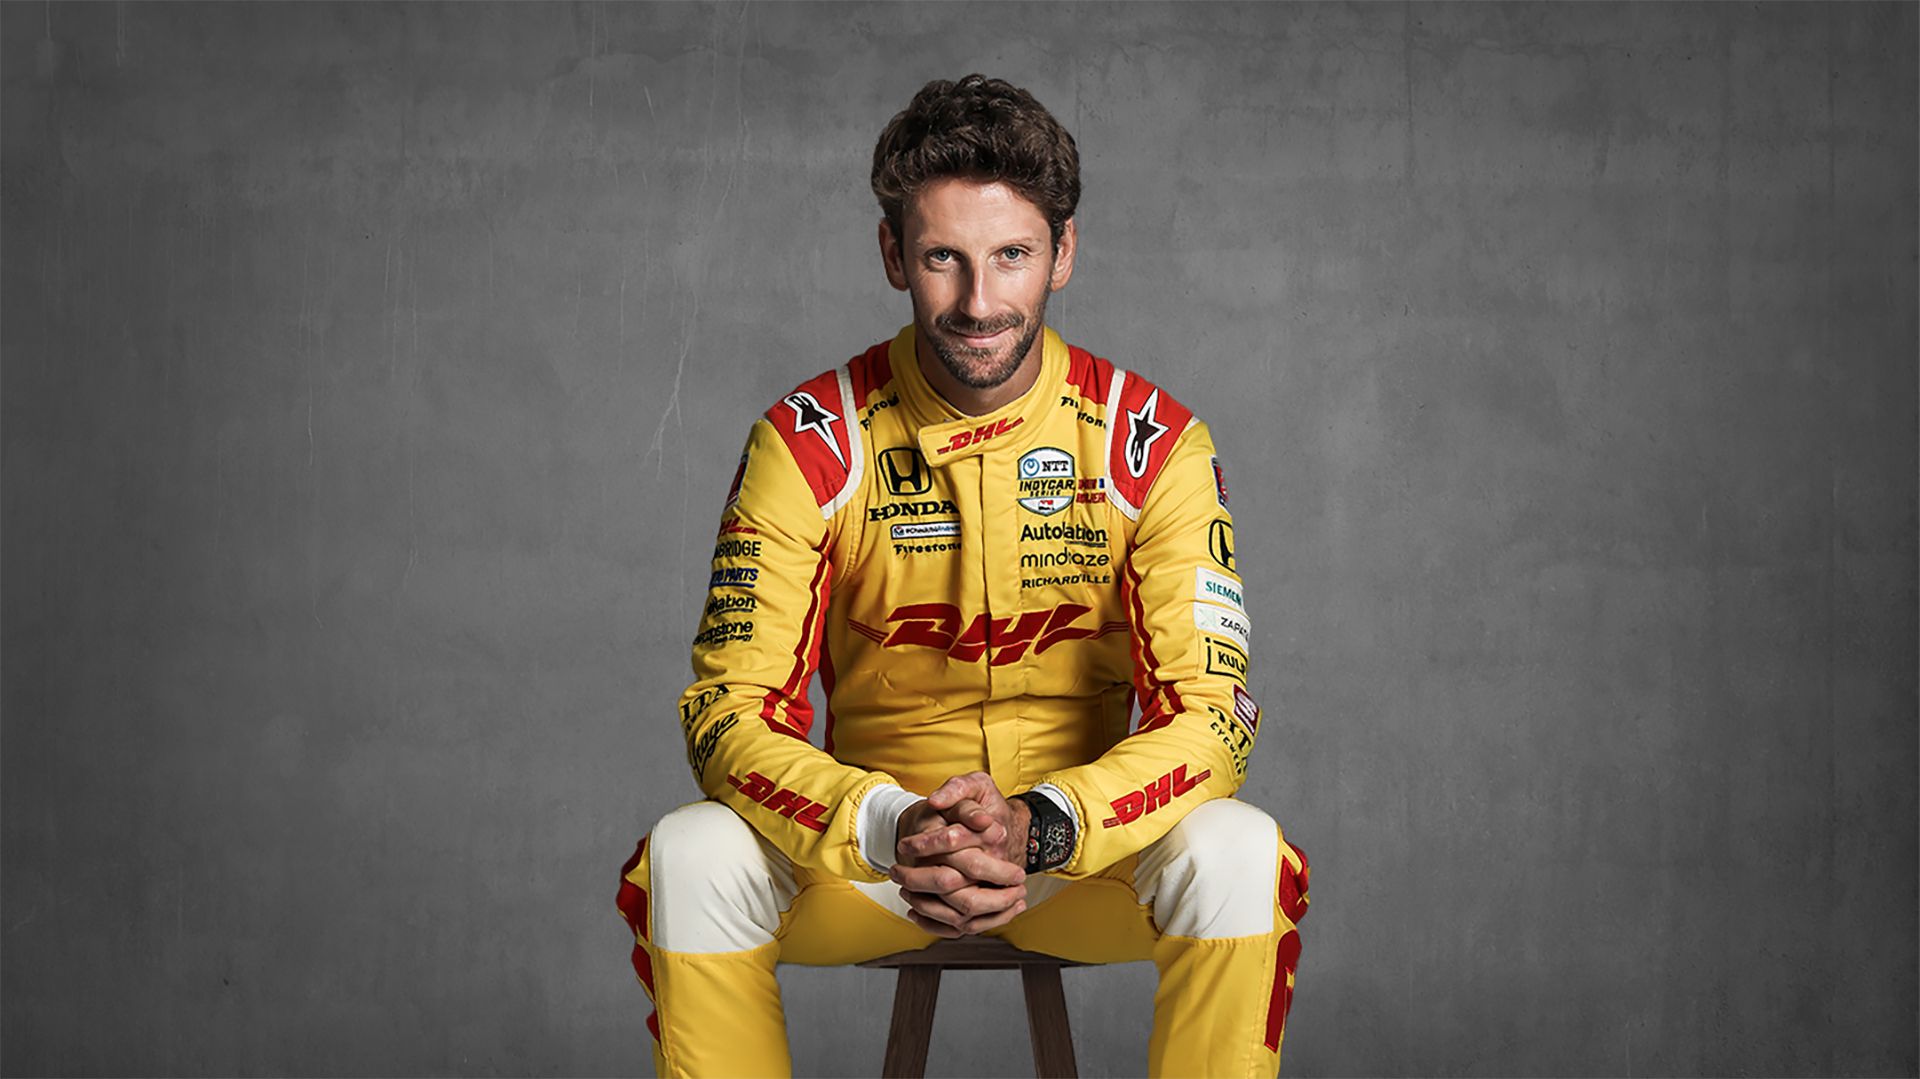 Indy Race Car Driver Romain Grosjean poses for a portrait in his bright yellow DHL Express racing suit